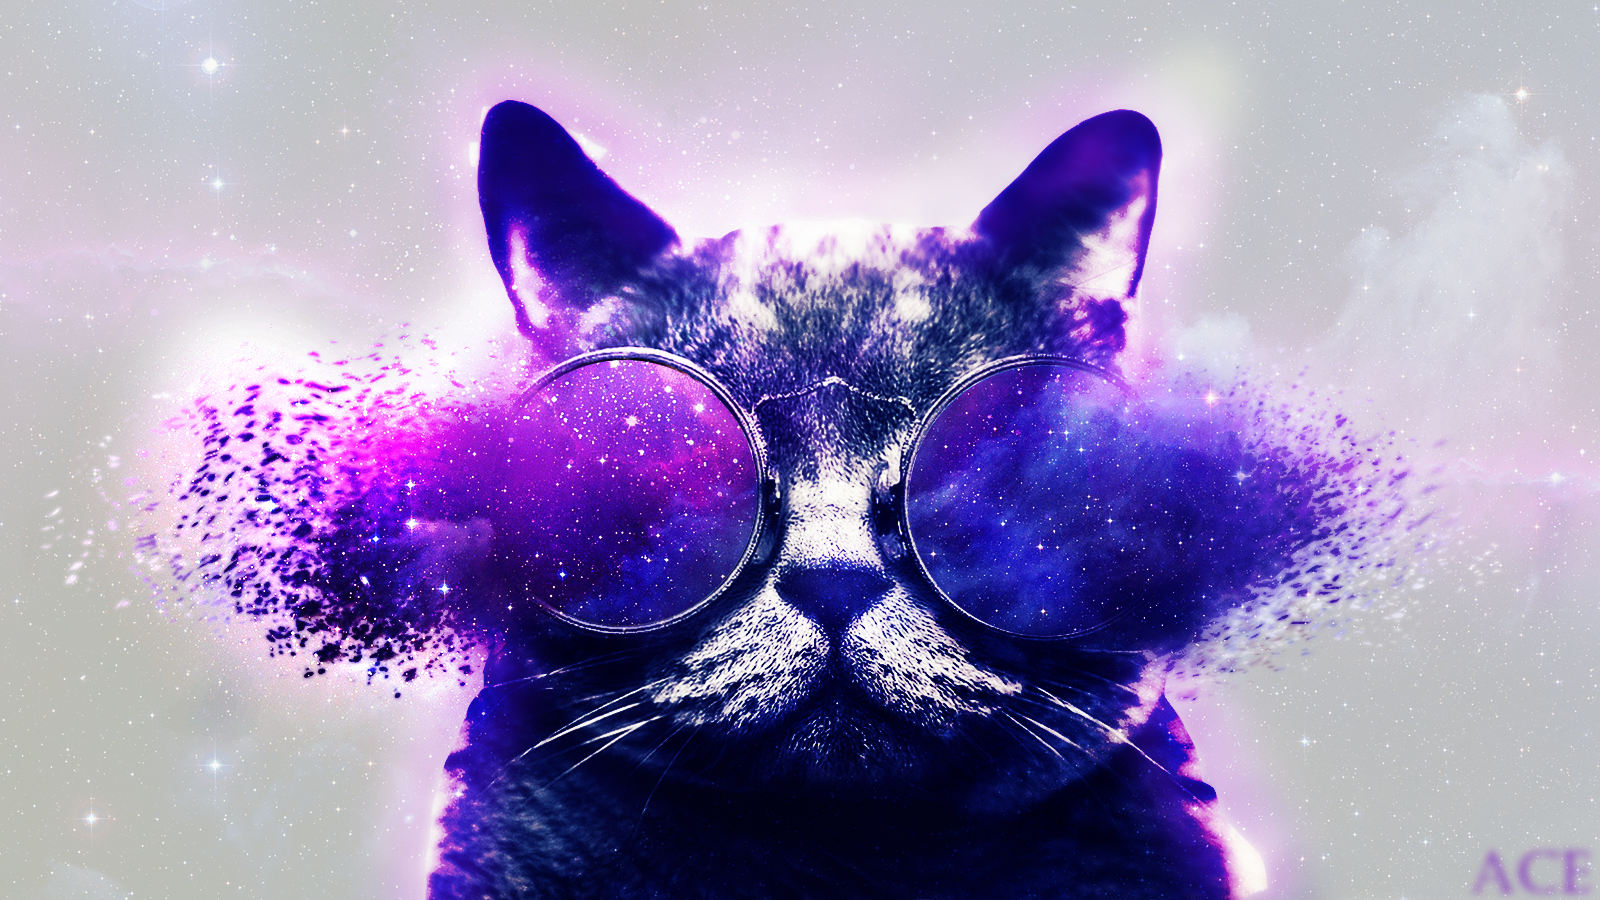 Galaxy - The Cat by AceNotAce on DeviantArt